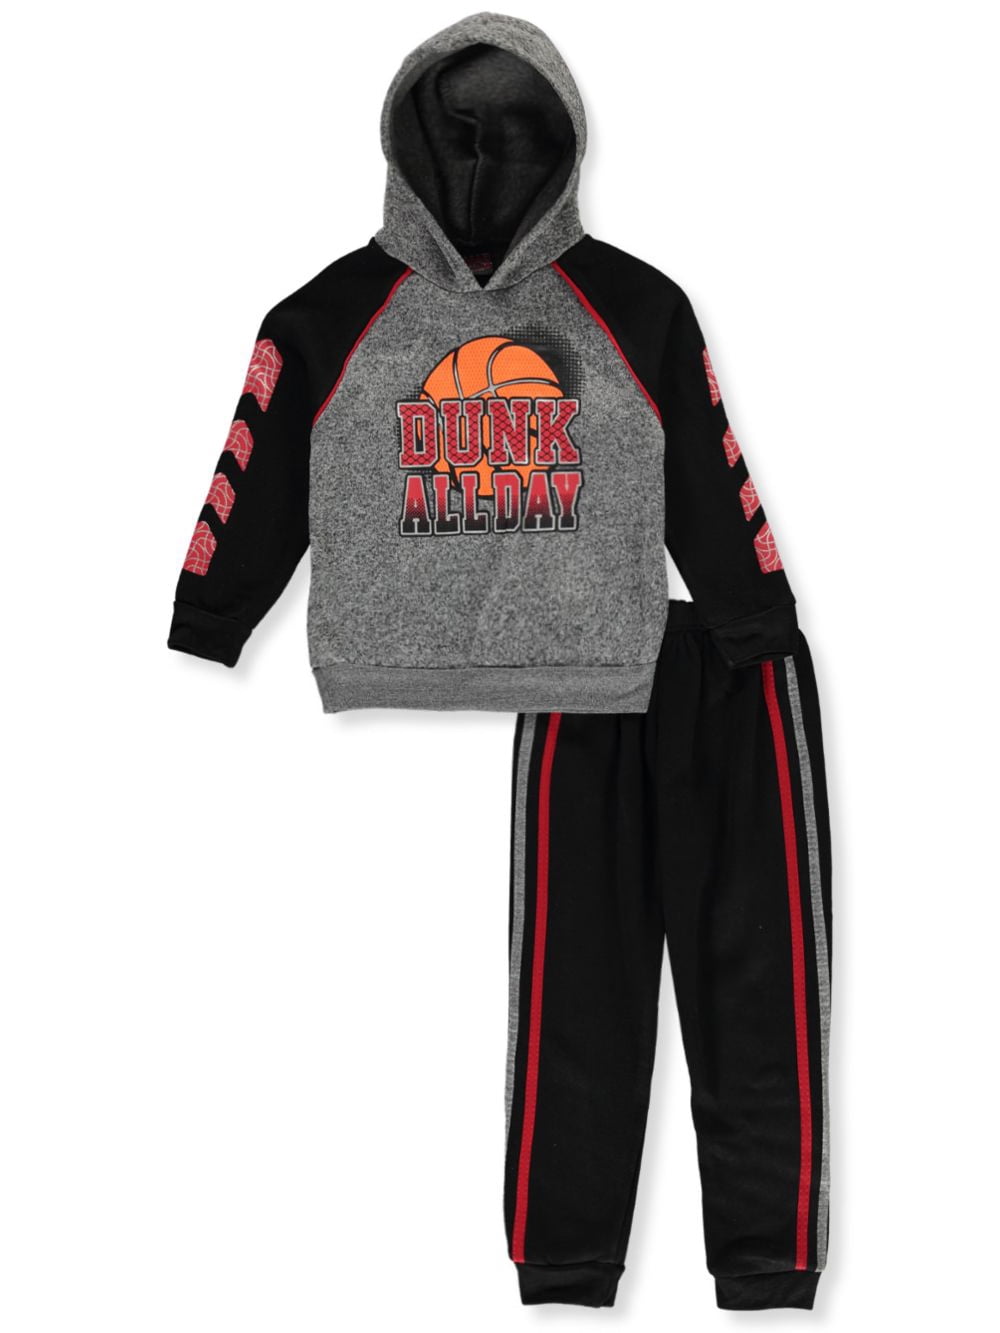 S1ope Boys Savage 2-Piece Sweatsuit Outfit